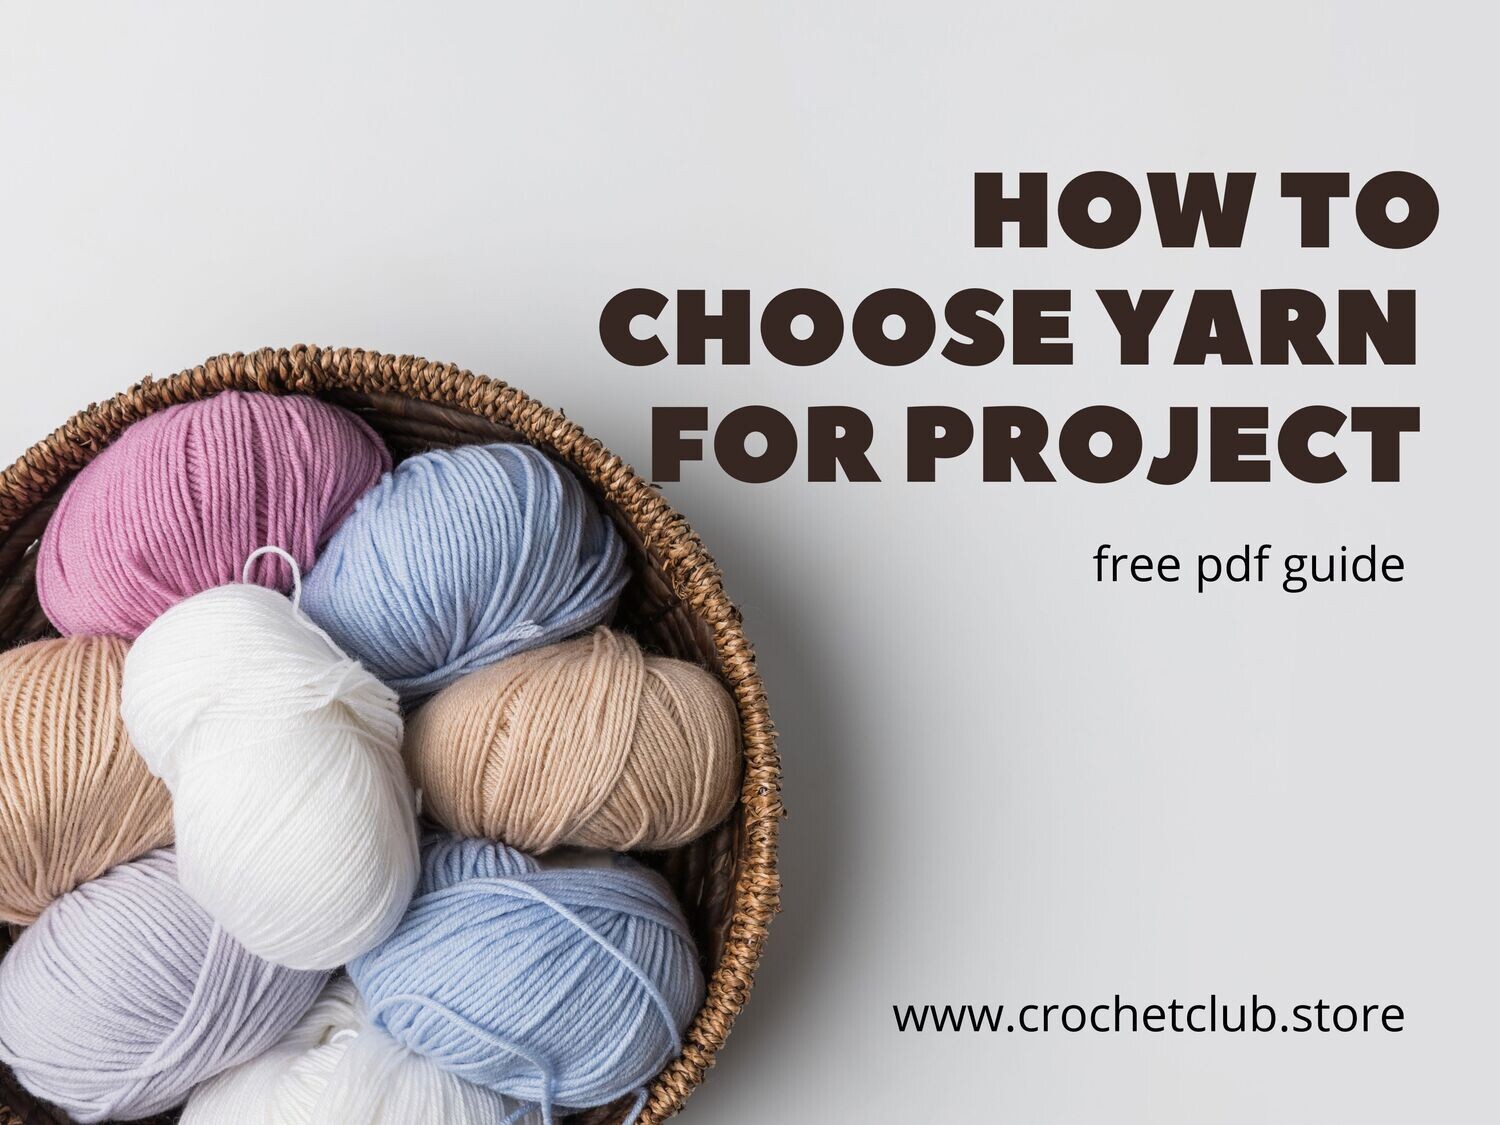 How to choose yarn for the project, manual for knitters and crocheters, printable quick guide